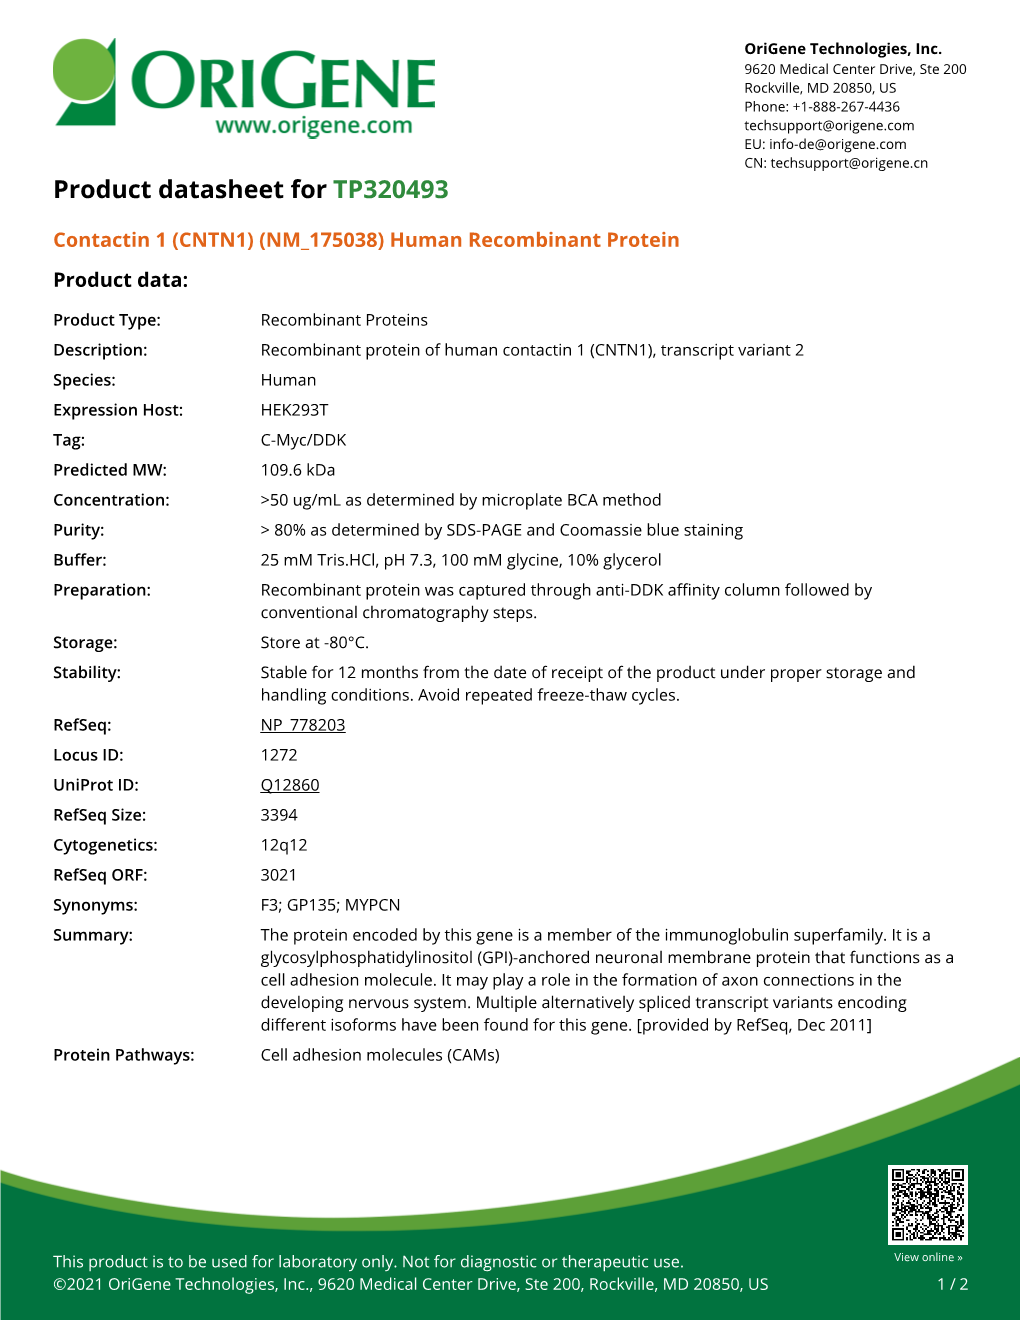 Contactin 1 (CNTN1) (NM 175038) Human Recombinant Protein Product Data